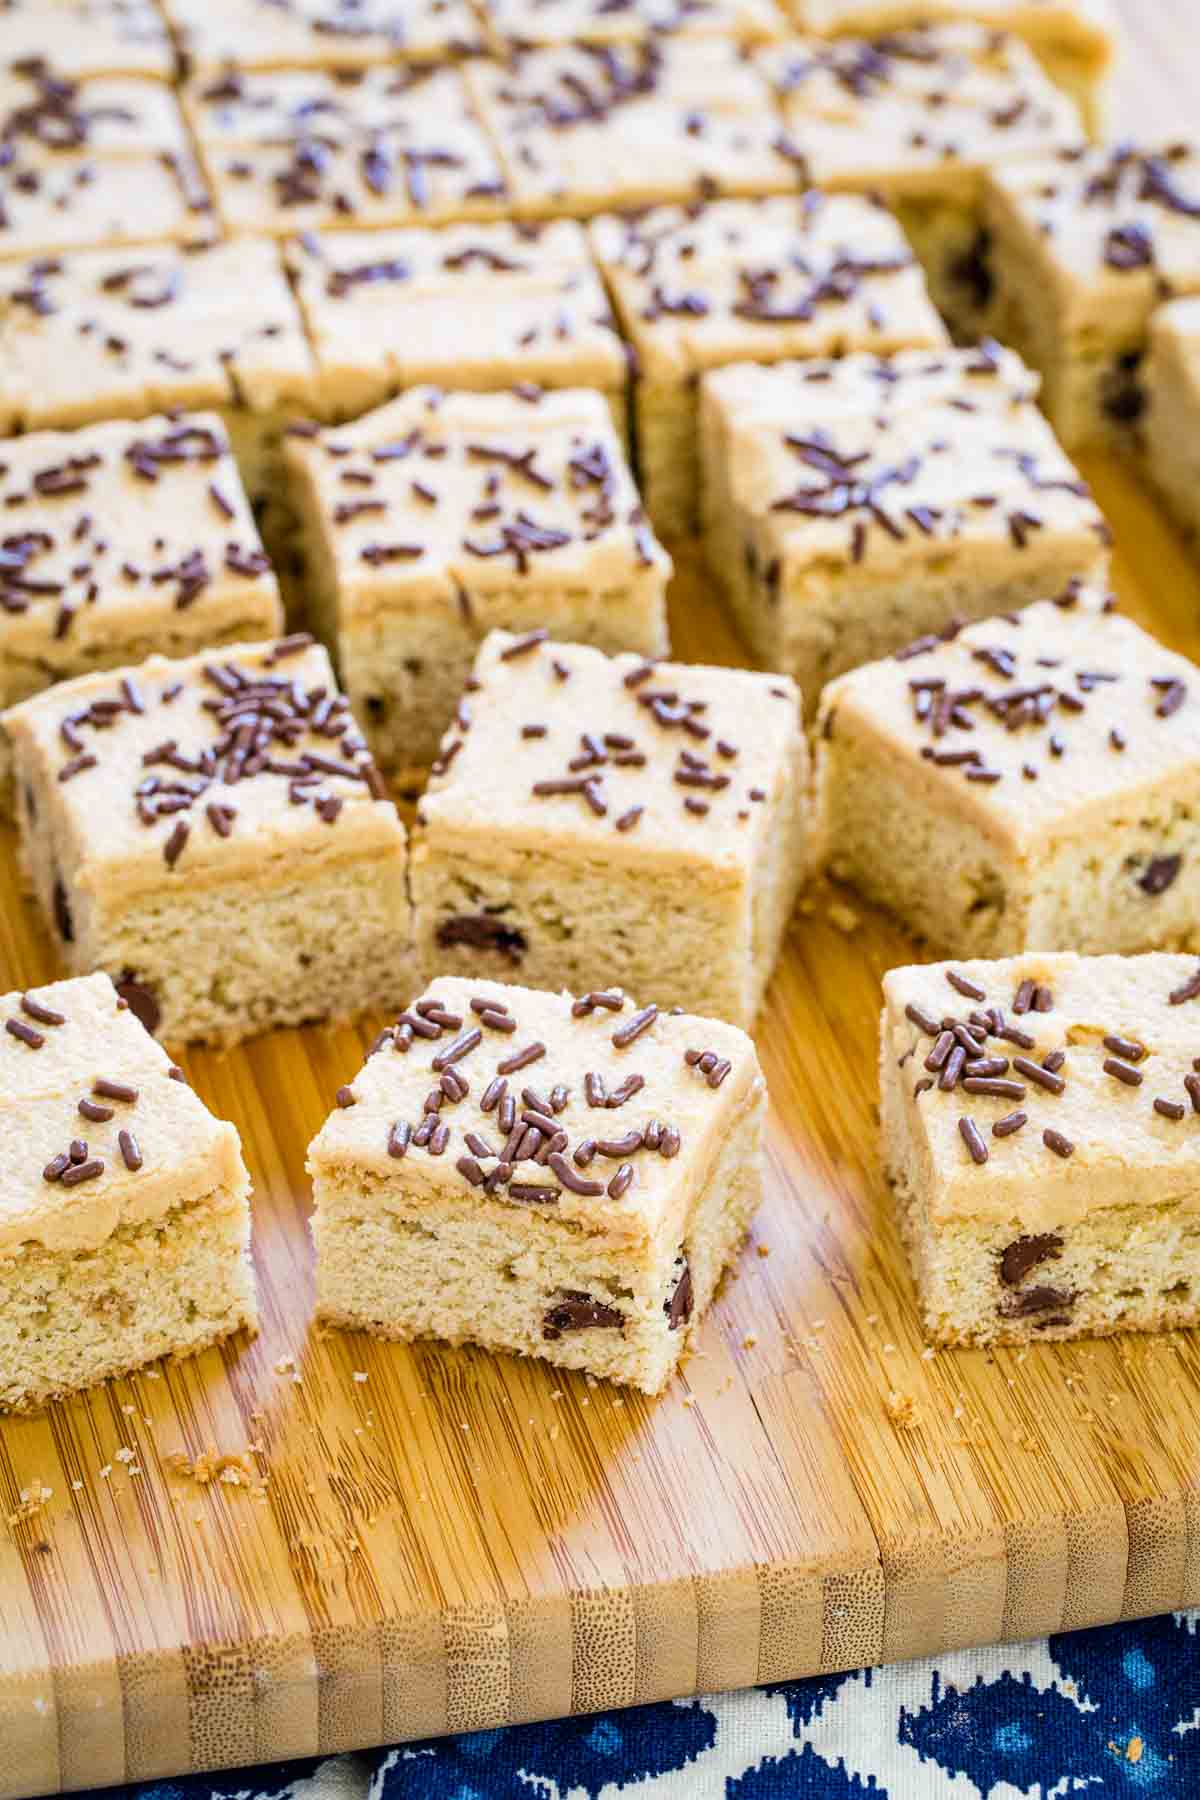 Chocolate chip cookie bars are shown on a wooden board.